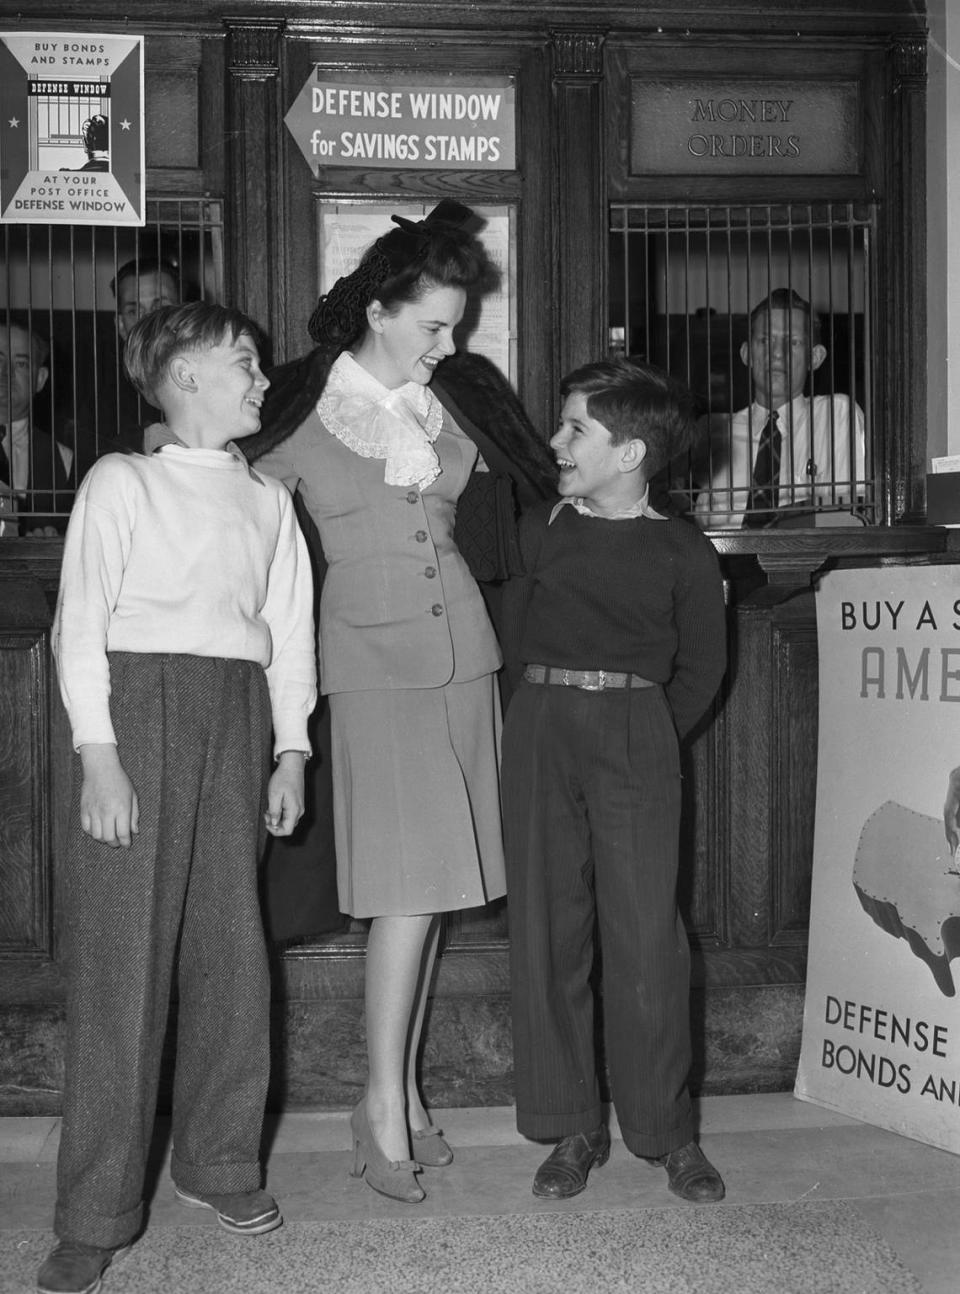 Jan. 30, 1942: Judy Garland is in Mineral Wells to visit Camp Wolters for a USO show. She poses with two of her admirers, Billy Suddith, left, and Herbert Cohen of Mineral Wells. Miss Garland led a parade of 2,000 school children to the post office to purchase stamps. Fort Worth Star-Telegram archives/UT Arlington Special Collections